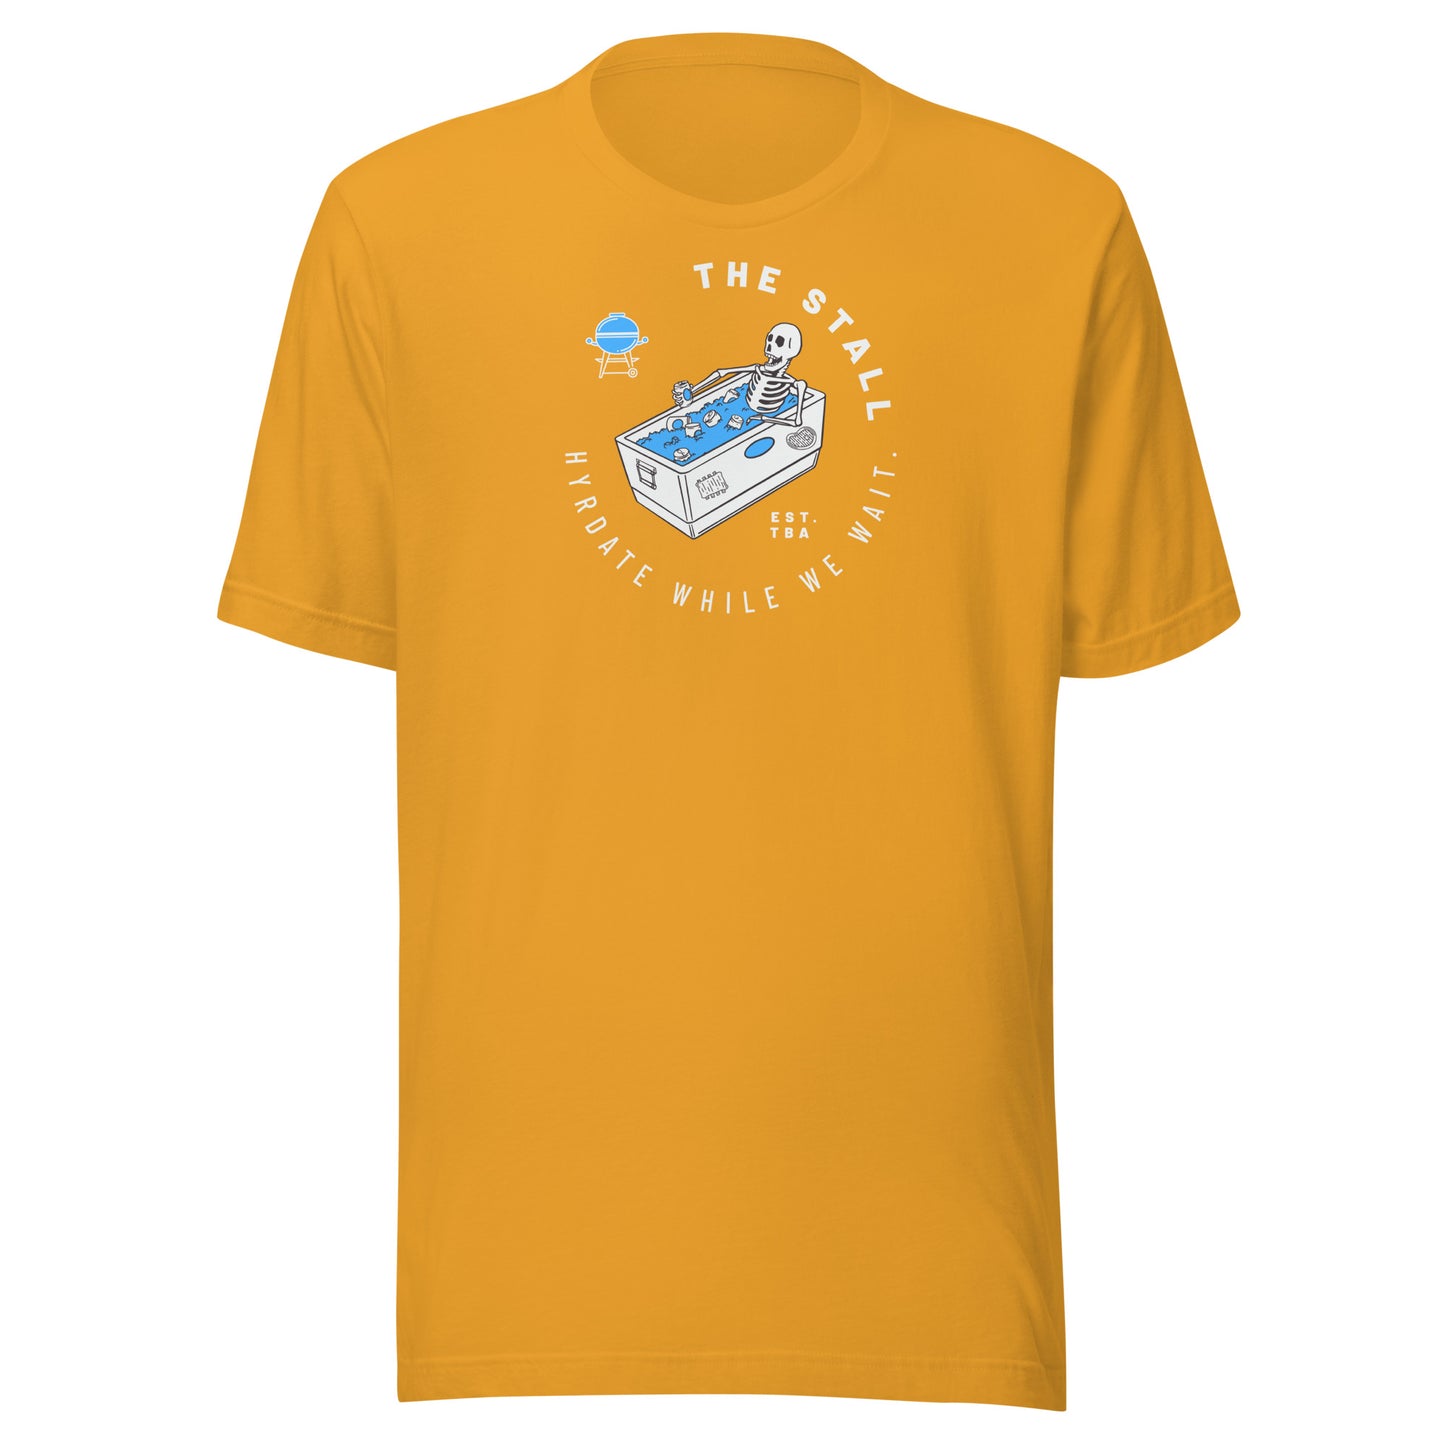 The Stall - Hydrate While We Wait t-shirt